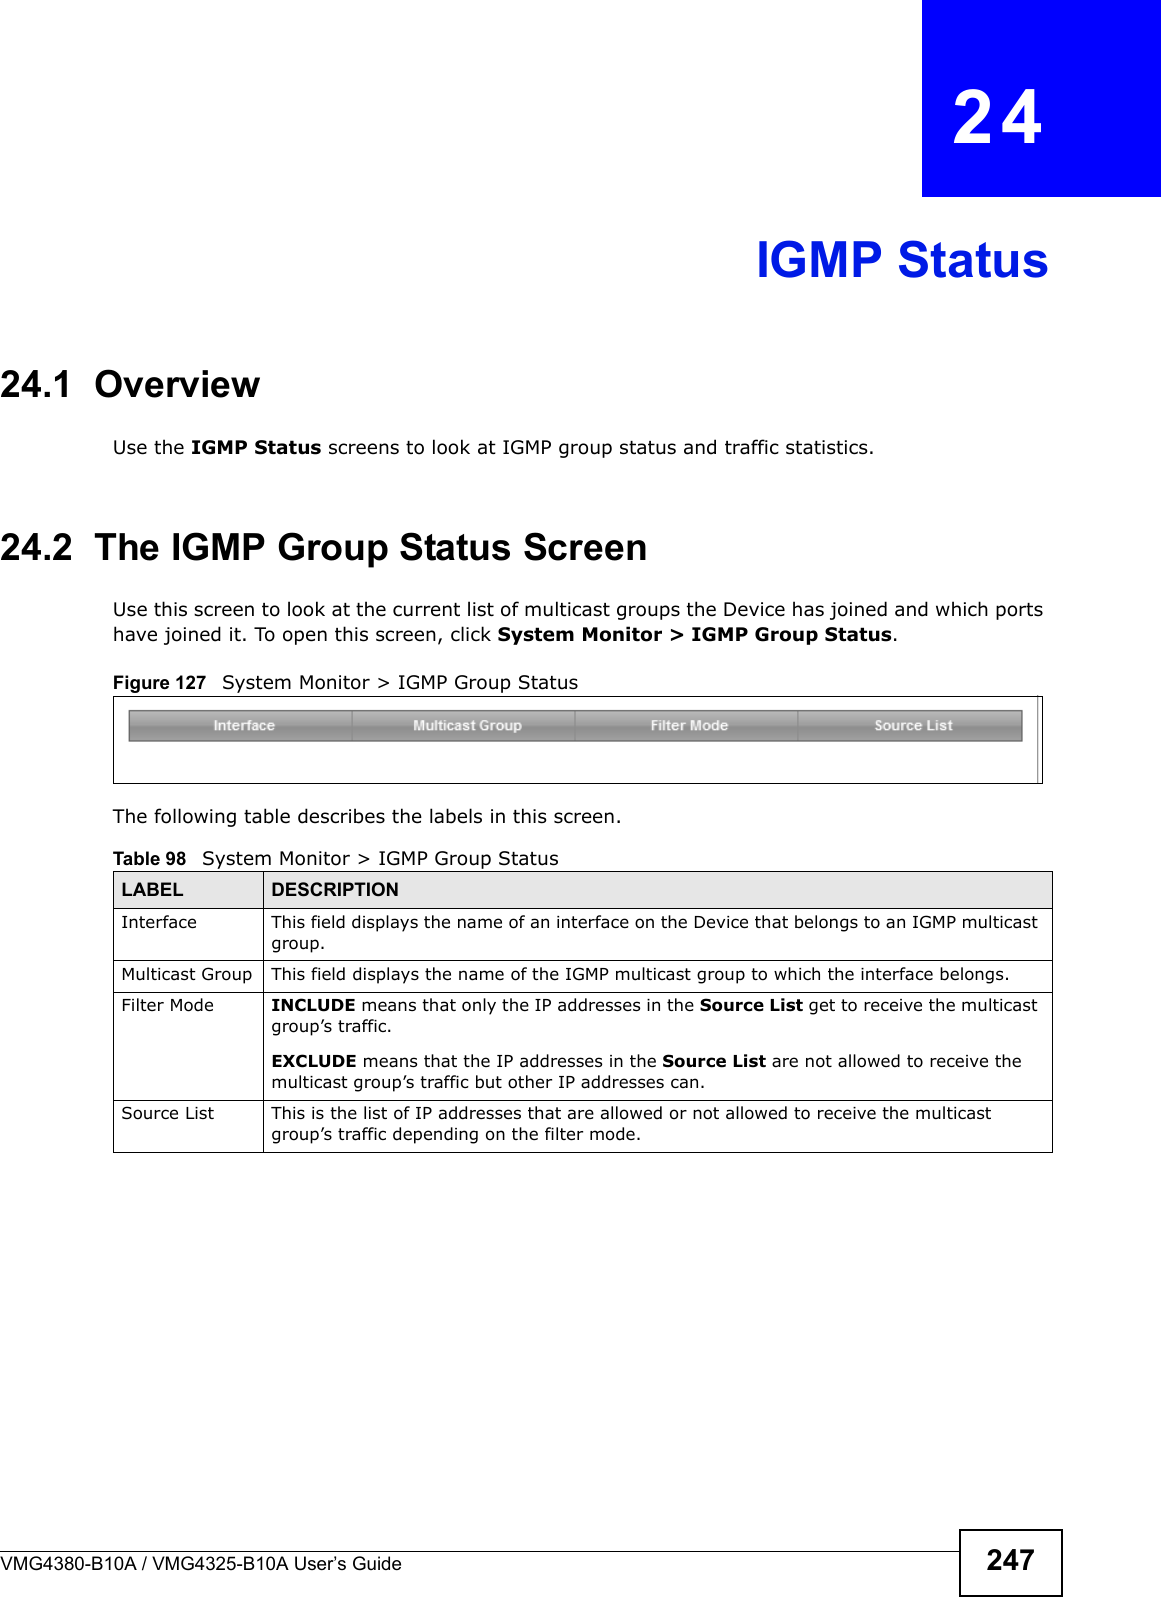 VMG4380-B10A / VMG4325-B10A User’s Guide 247CHAPTER  24IGMP Status24.1  OverviewUse the IGMP Status screens to look at IGMP group status and traffic statistics. 24.2  The IGMP Group Status ScreenUse this screen to look at the current list of multicast groups the Device has joined and which ports have joined it. To open this screen, click System Monitor &gt; IGMP Group Status.Figure 127   System Monitor &gt; IGMP Group StatusThe following table describes the labels in this screen.Table 98   System Monitor &gt; IGMP Group StatusLABEL DESCRIPTIONInterface This field displays the name of an interface on the Device that belongs to an IGMP multicastgroup.Multicast Group This field displays the name of the IGMP multicast group to which the interface belongs.Filter Mode  INCLUDE means that only the IP addresses in the Source List get to receive the multicastgroup’s traffic.EXCLUDE means that the IP addresses in the Source List are not allowed to receive the multicast group’s traffic but other IP addresses can.Source List This is the list of IP addresses that are allowed or not allowed to receive the multicastgroup’s traffic depending on the filter mode.